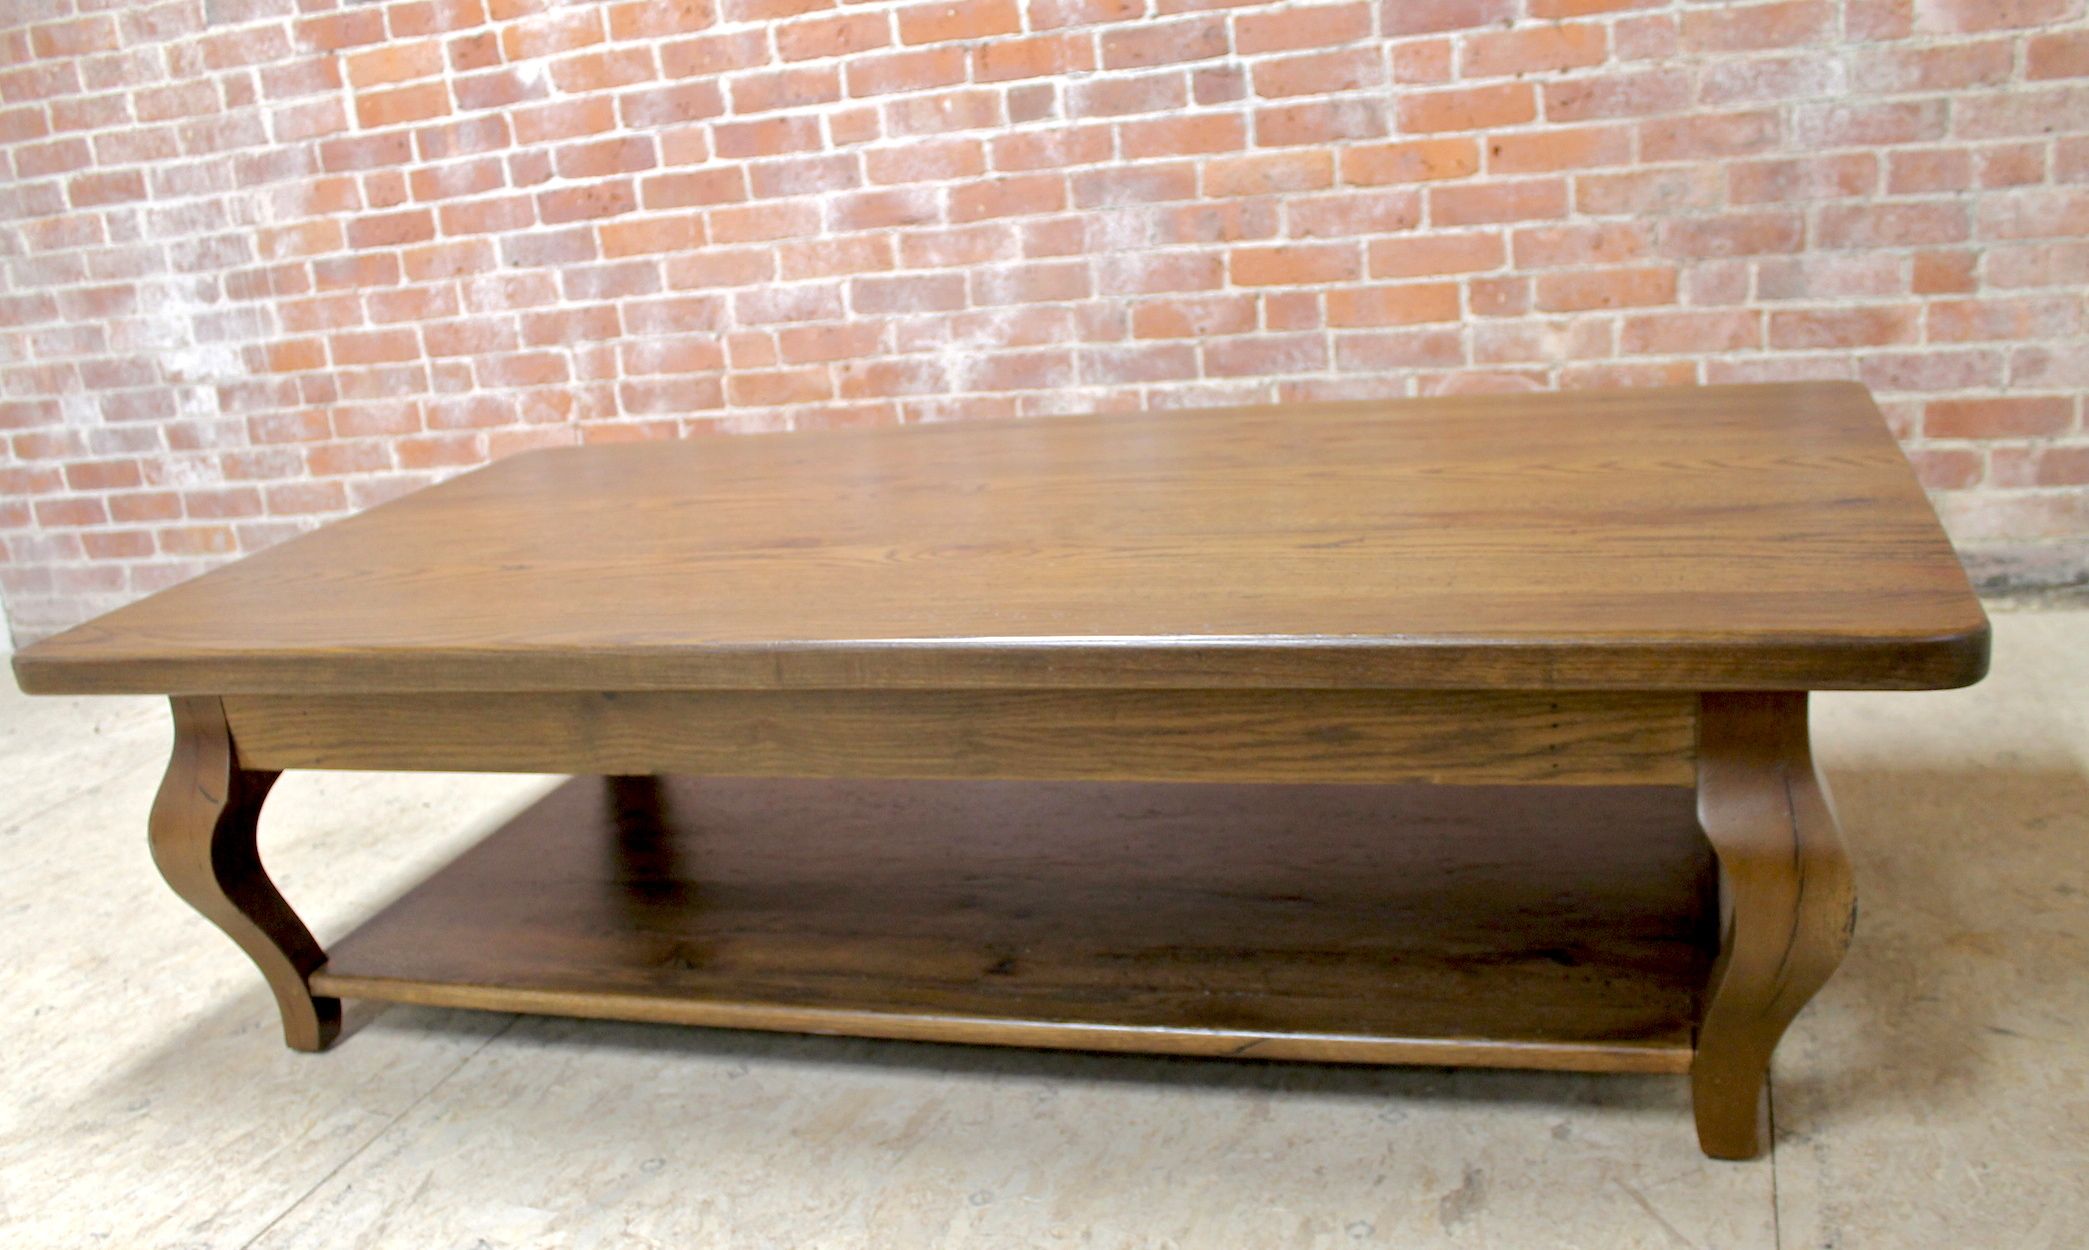 66in Oak Coffee Table In Antique Walnut Finish – Ecustomfinishes With Pemberly Row Replicated Wood Coffee Tables (Gallery 19 of 20)